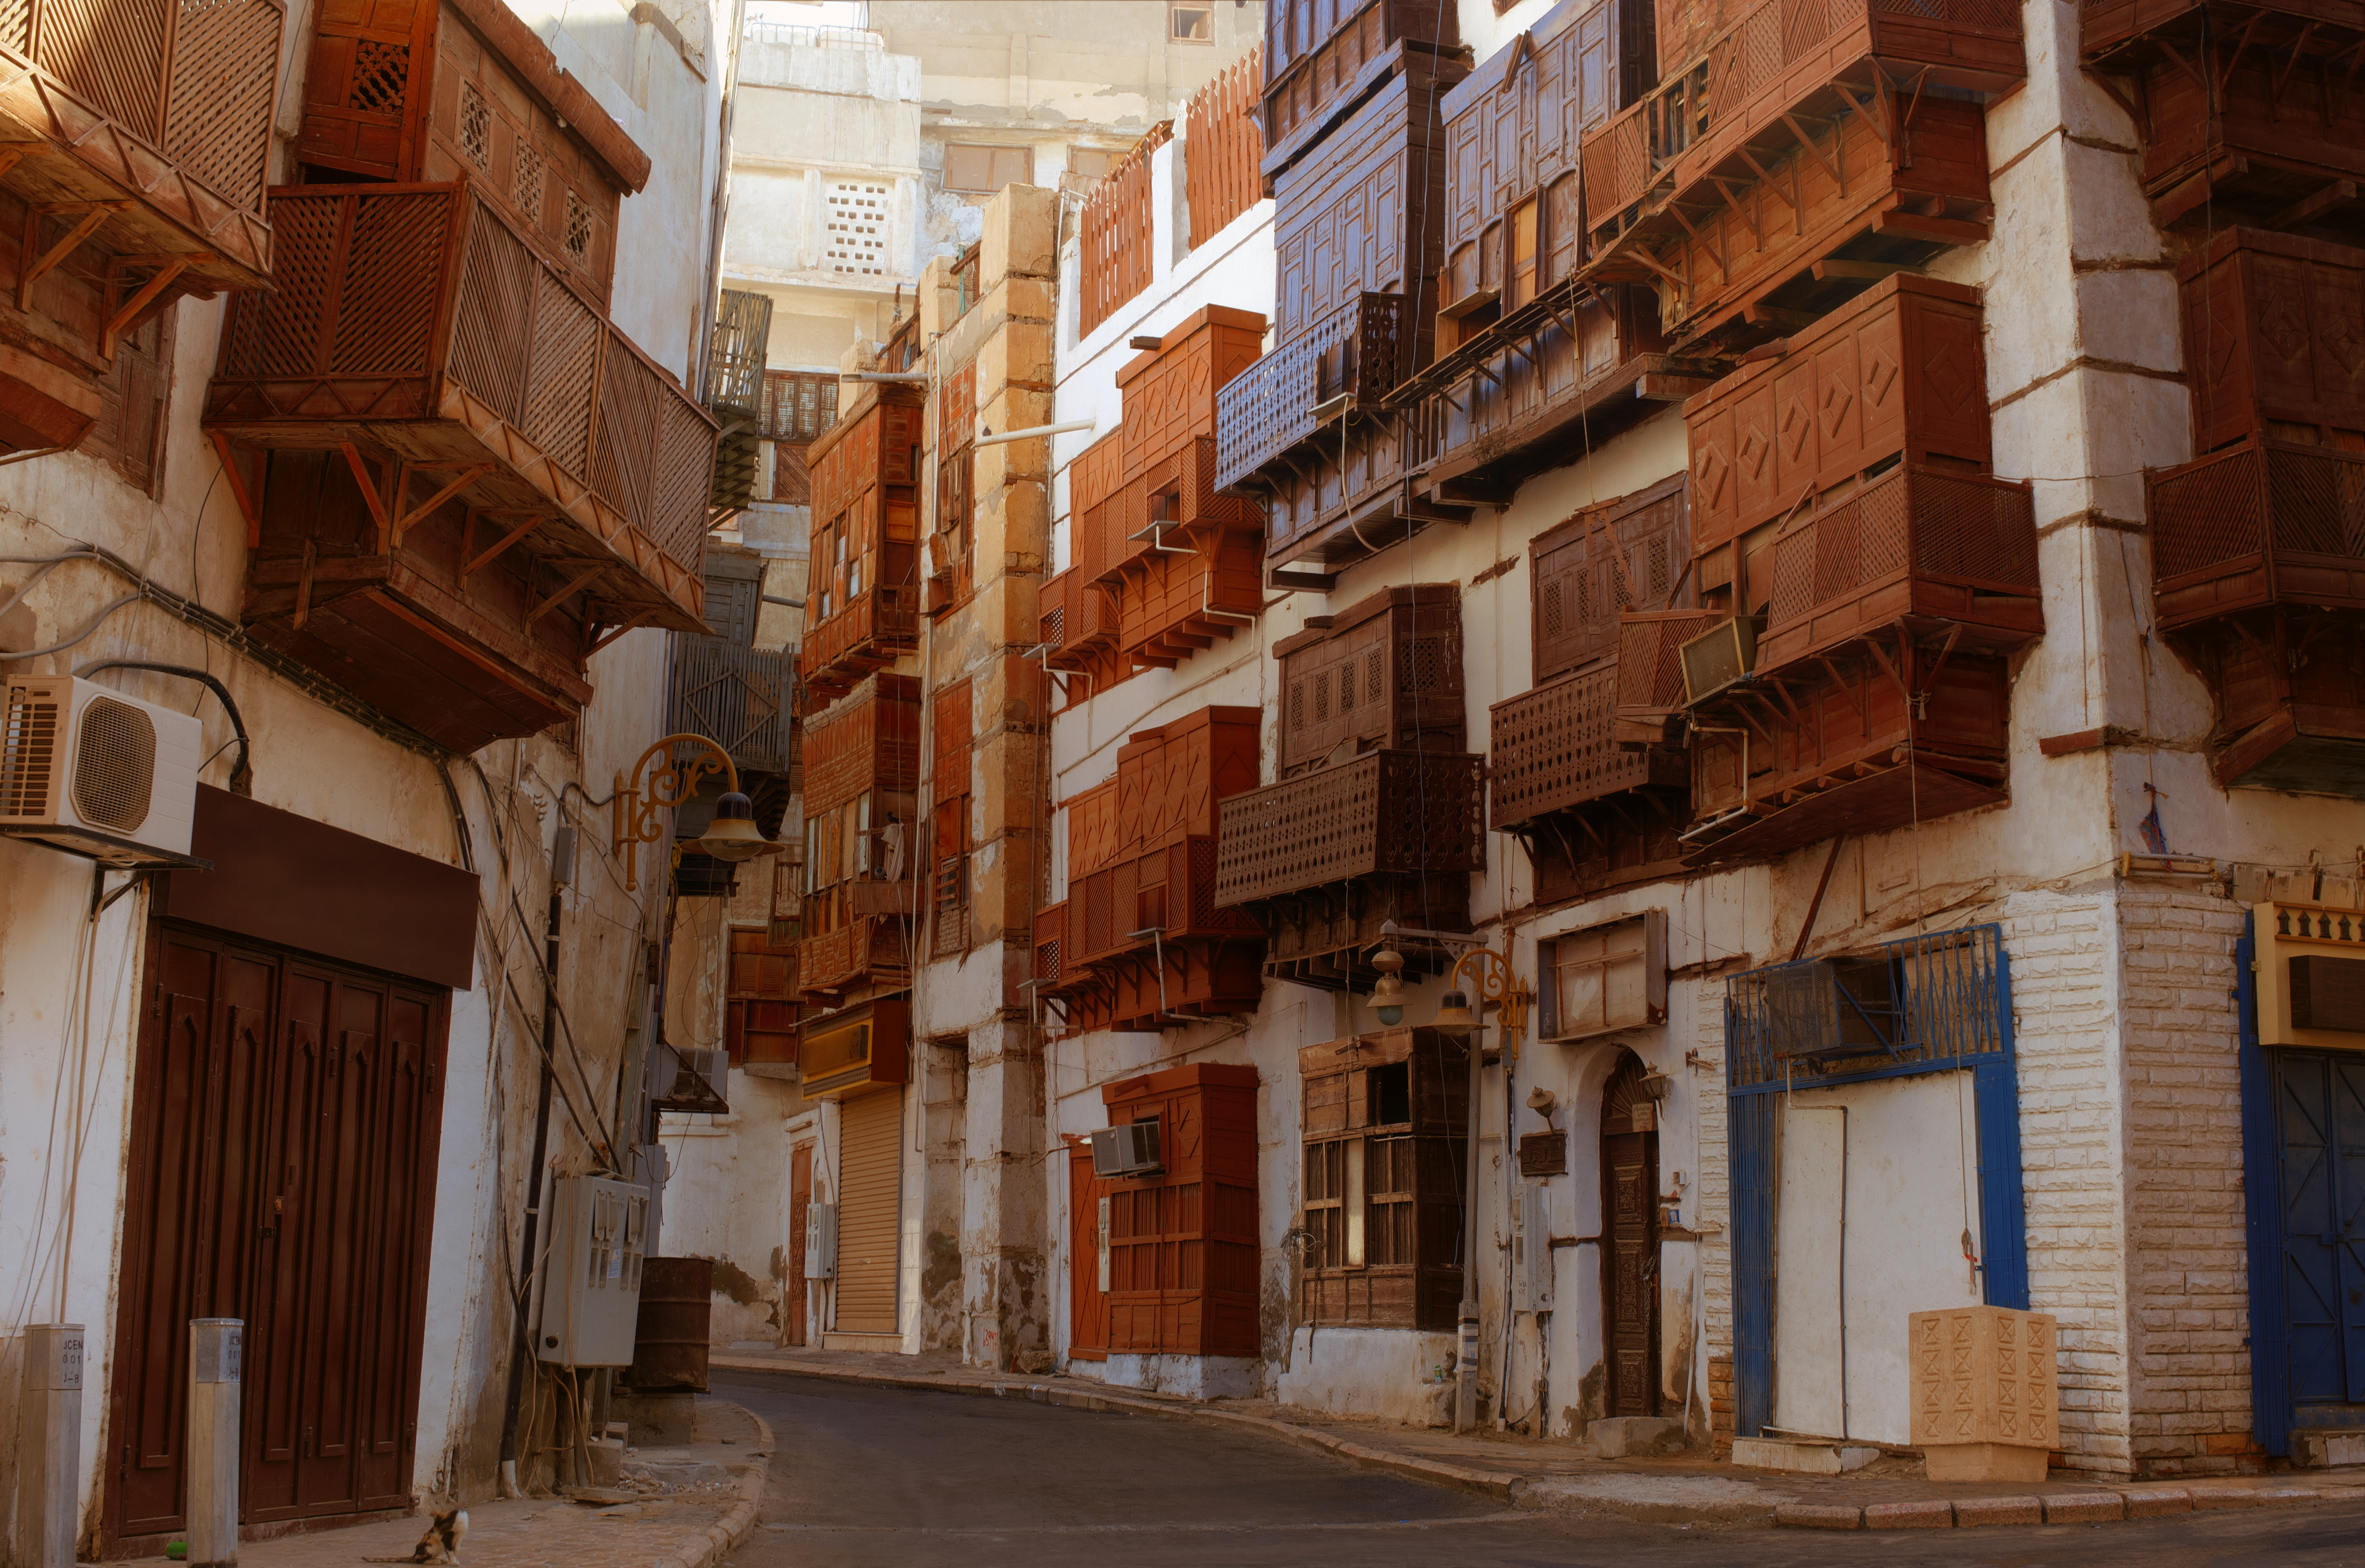 Top 5 cities to explore in Saudi Arabia 02 sta old city jeddah